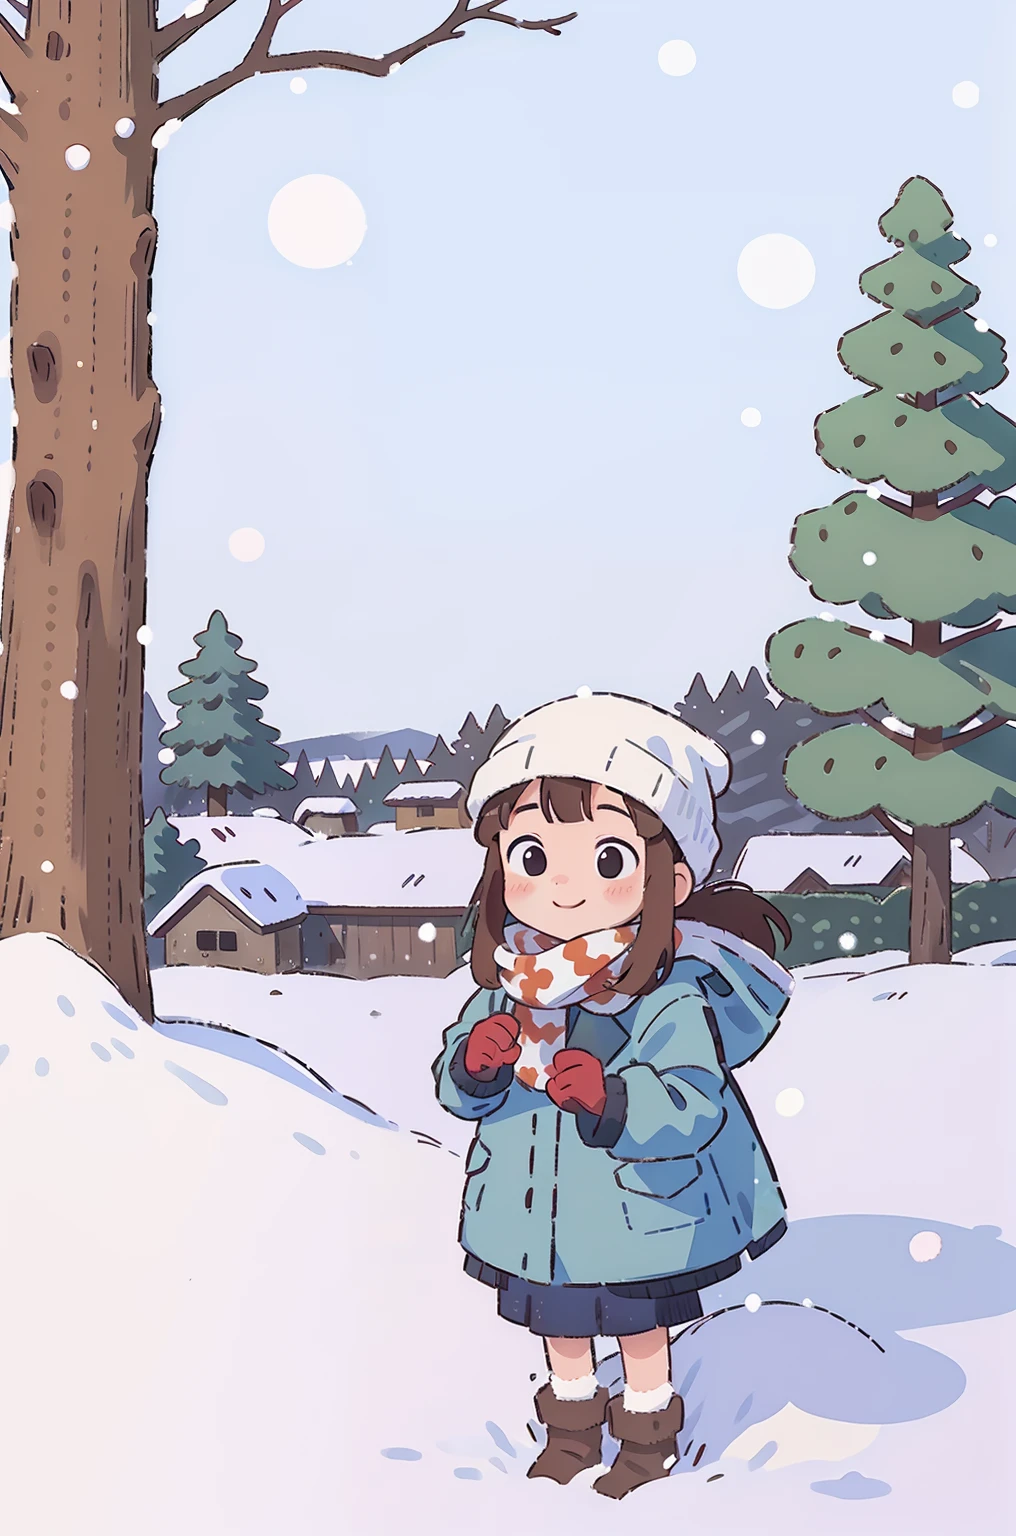 Girl, Long hair, face round, Big eyes, down jacket, Smile, Scarf, winter, park, yukito, White snow, tree, snow cover, in a panoramic view, Front